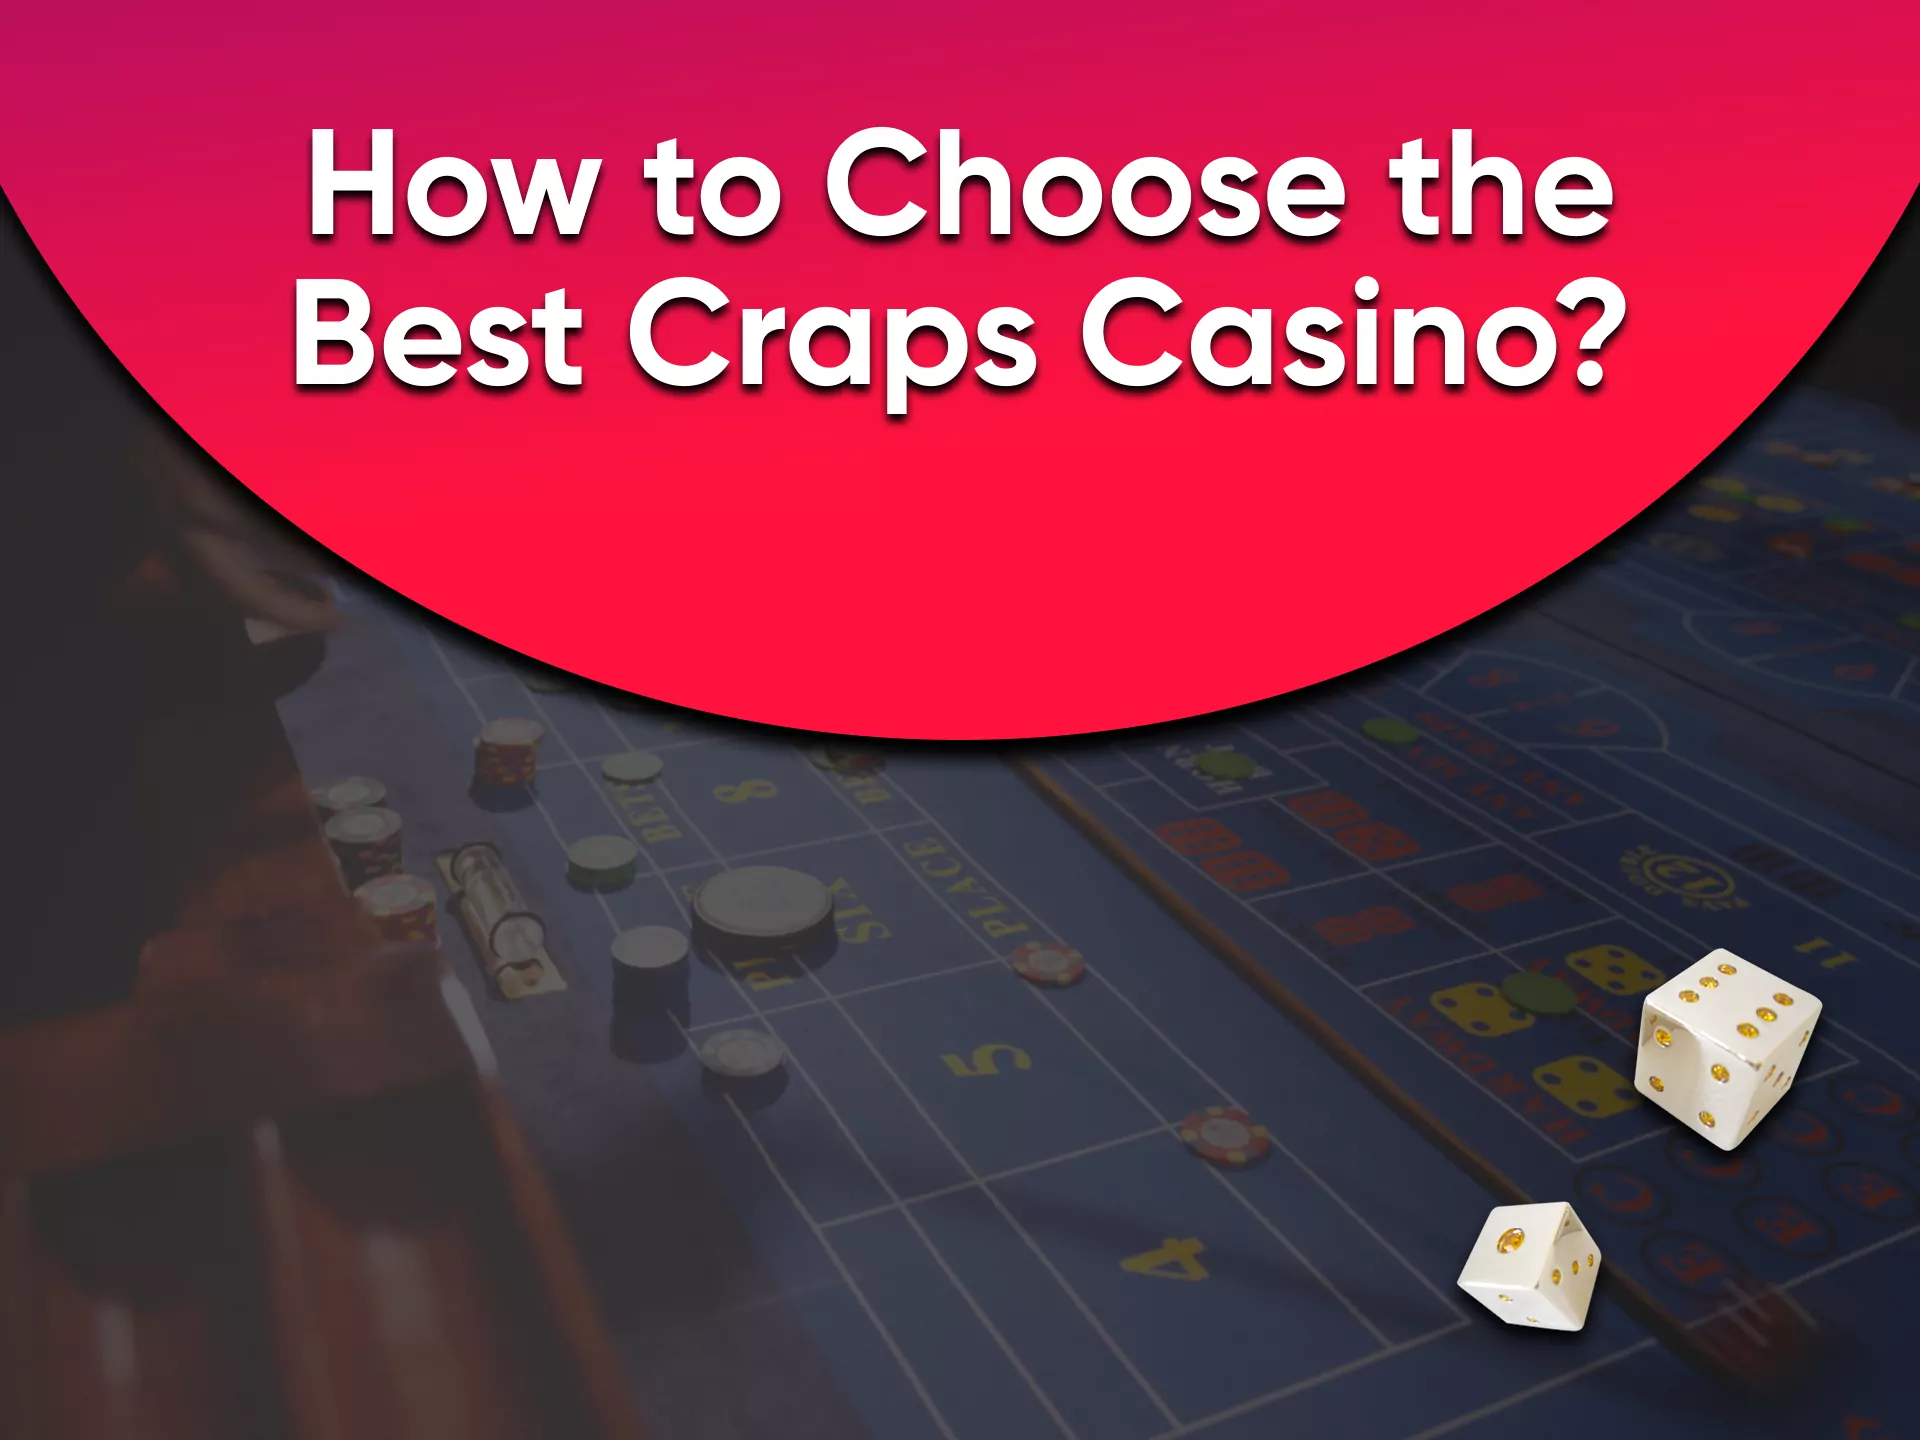 Choose a trusted service to play Craps.